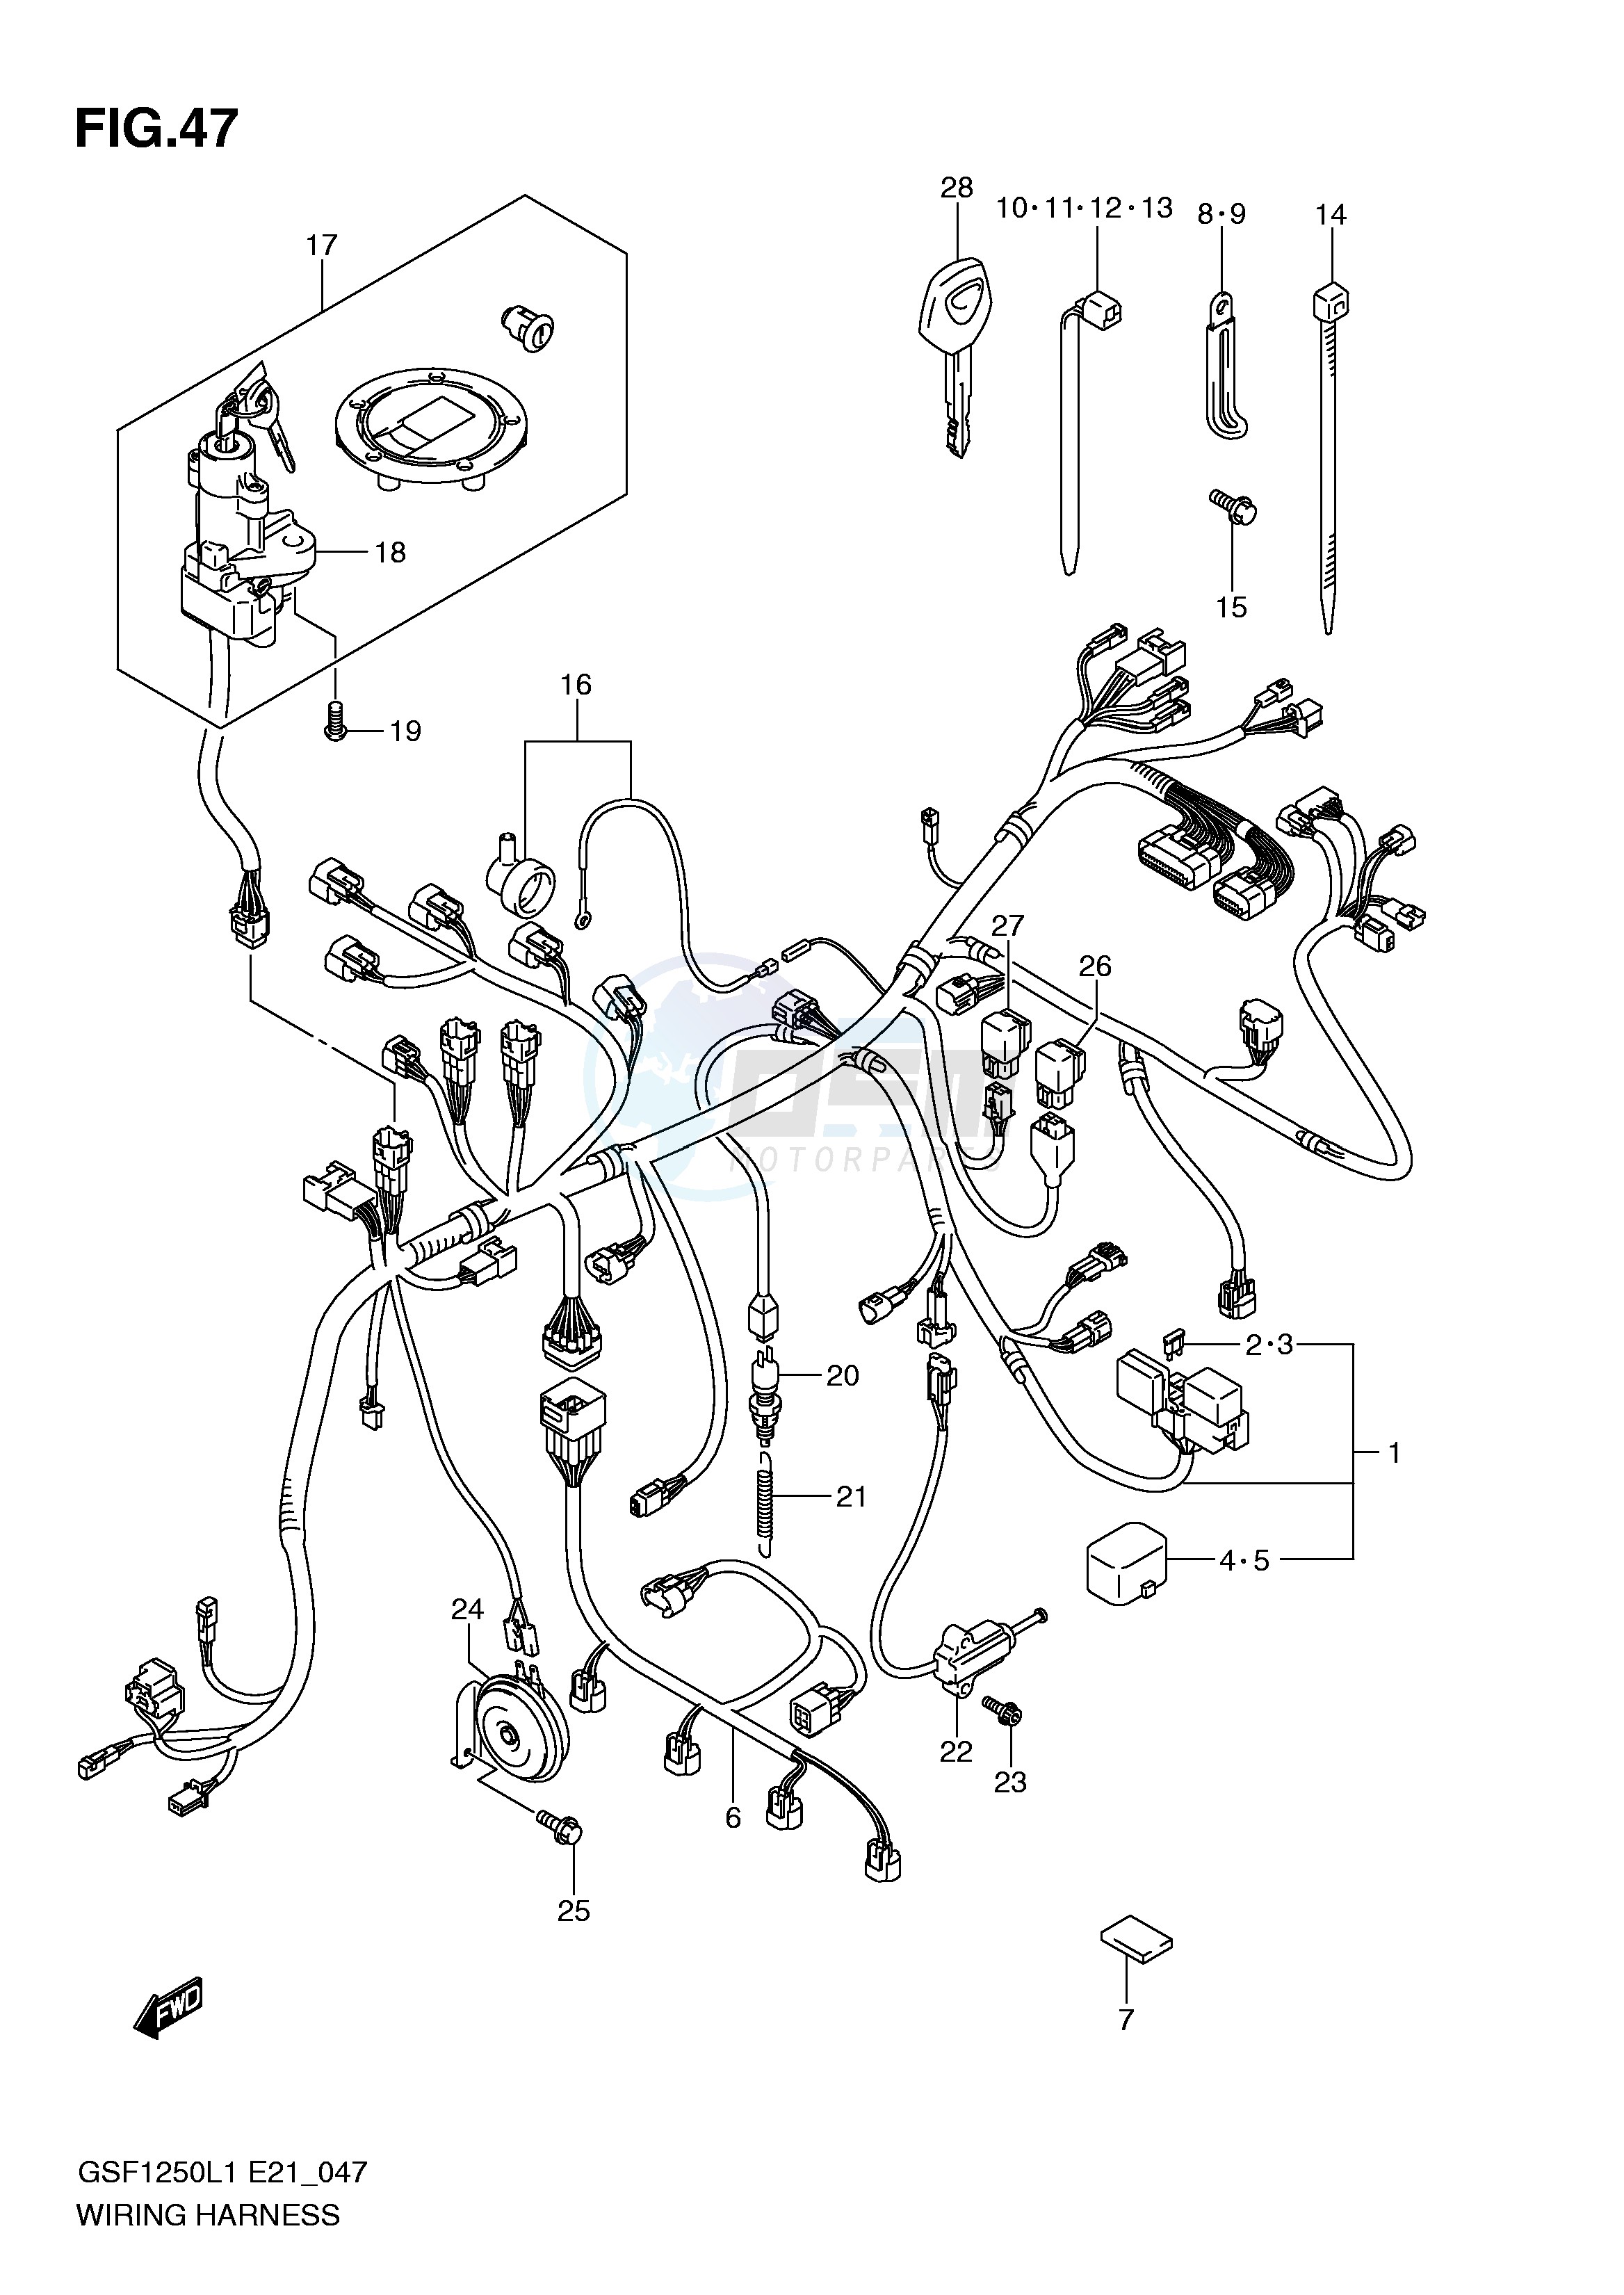 WIRING HARNESS (GSF1250L1 E24) image